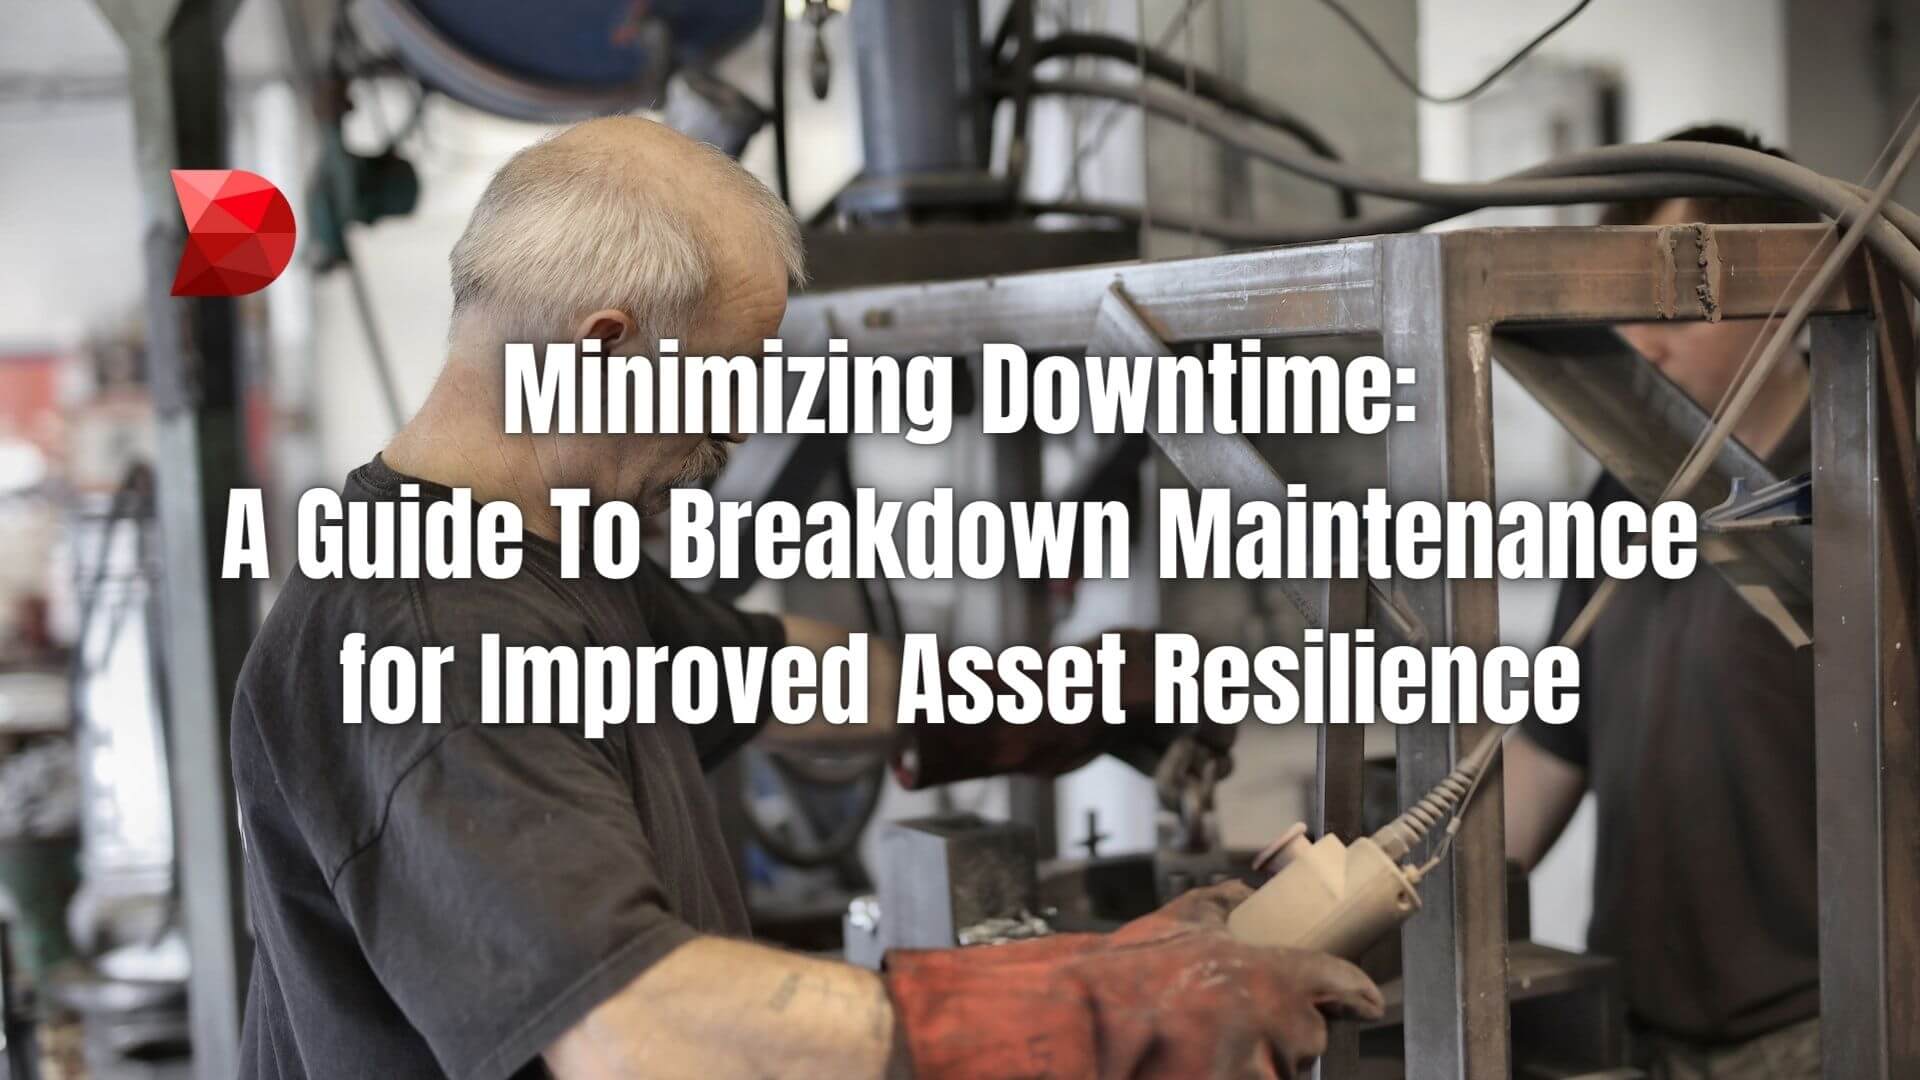 Breakdown maintenance helps businesses reduce the cost and complexity of emergency repairs and quickly restore operations. Learn more!